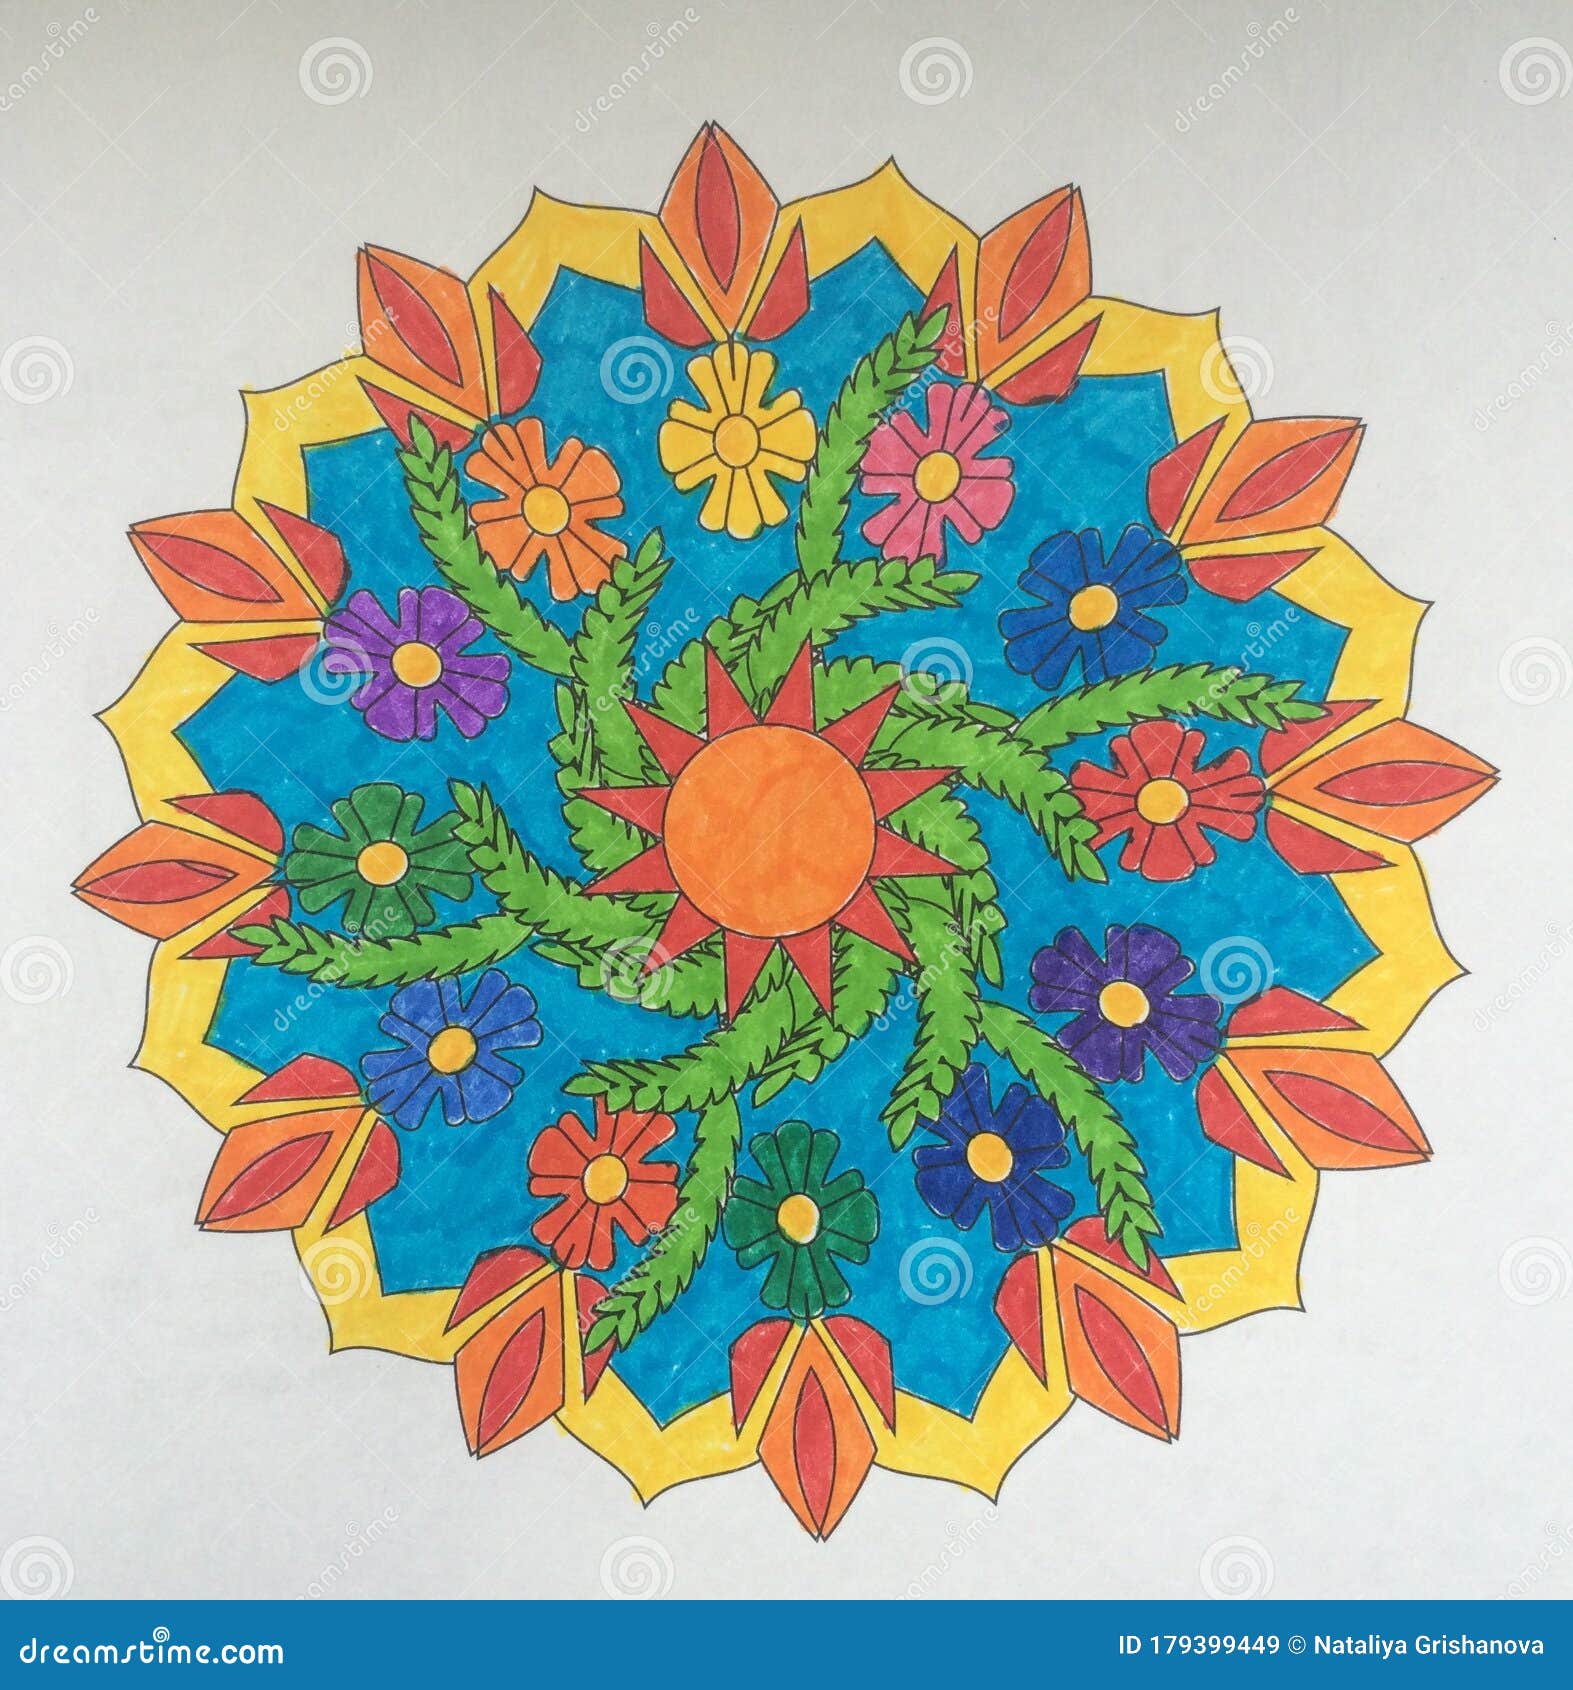 Download Mandala Wisdom Of The Universe From Art Therapy Coloring Book Stock Image Image Of Overcoming Painted 179399449